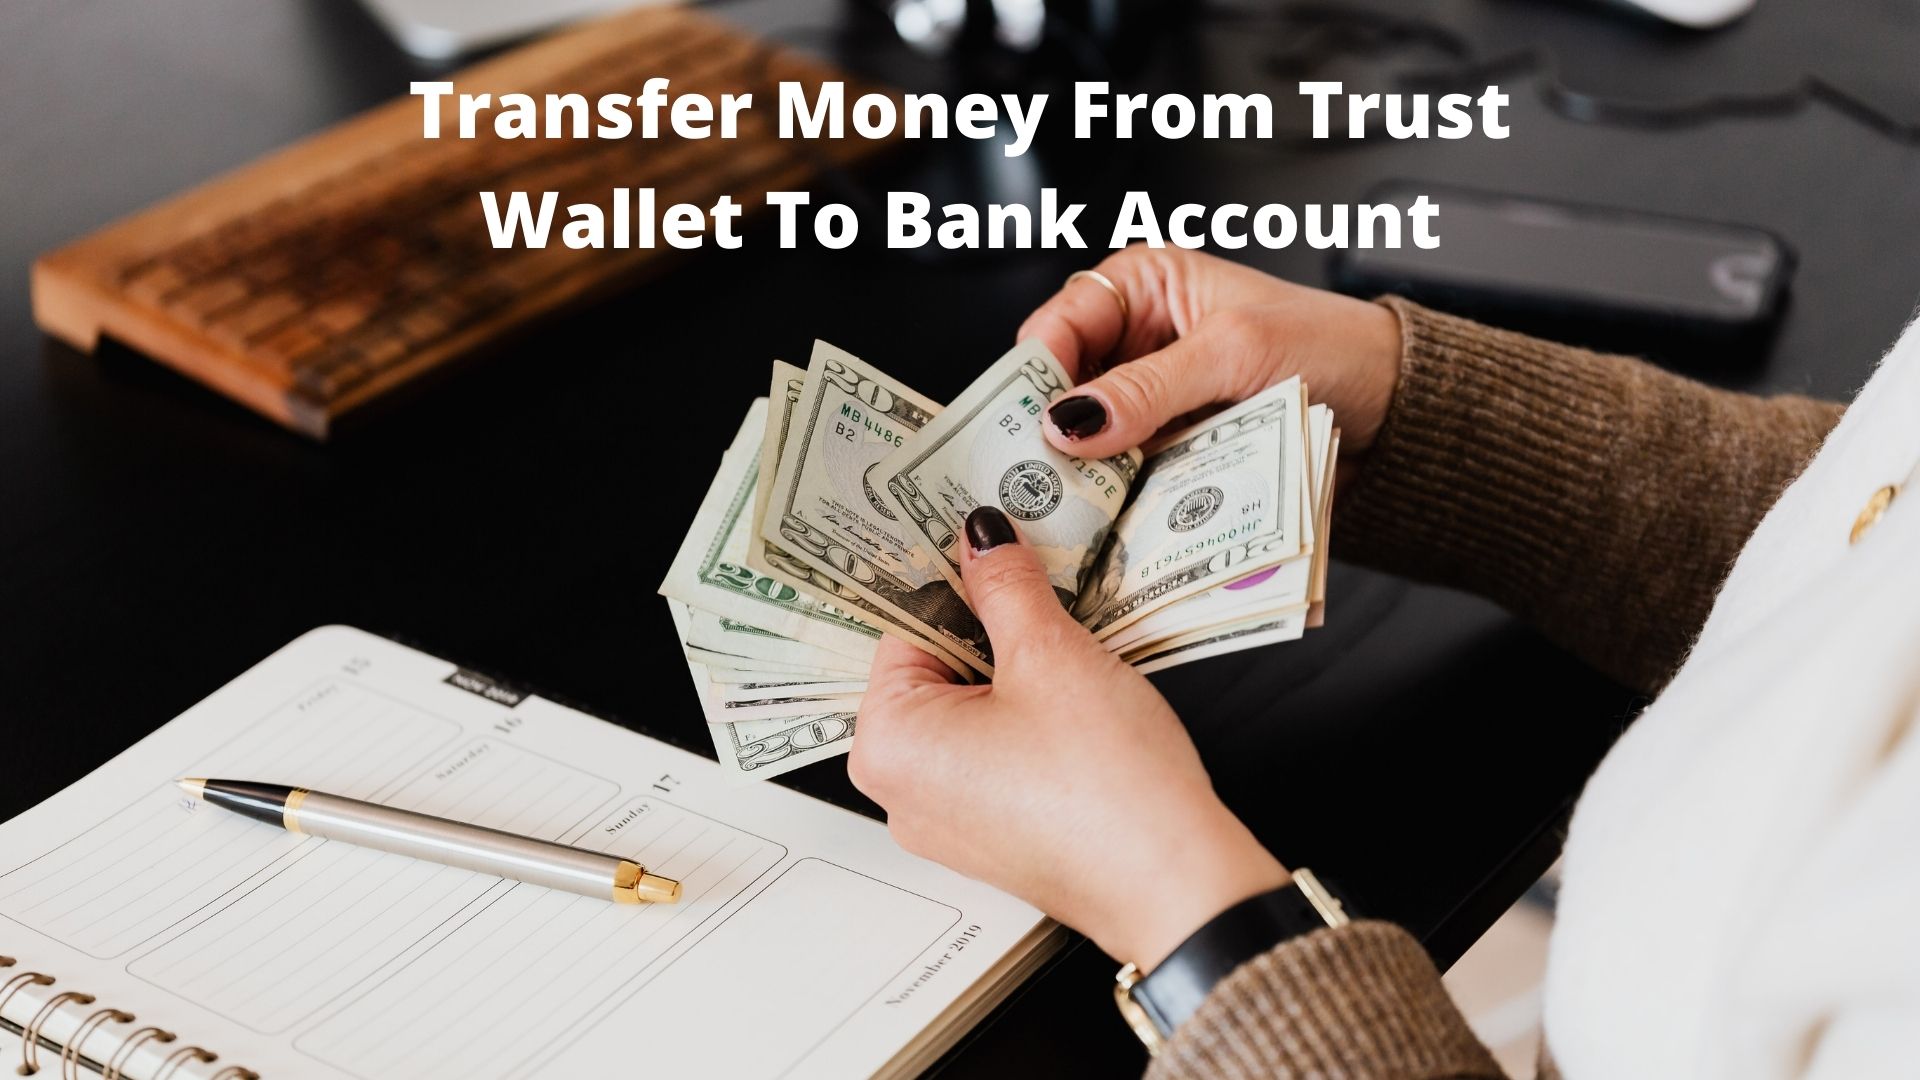 How To Transfer Money From Trust Wallet To Bank Account